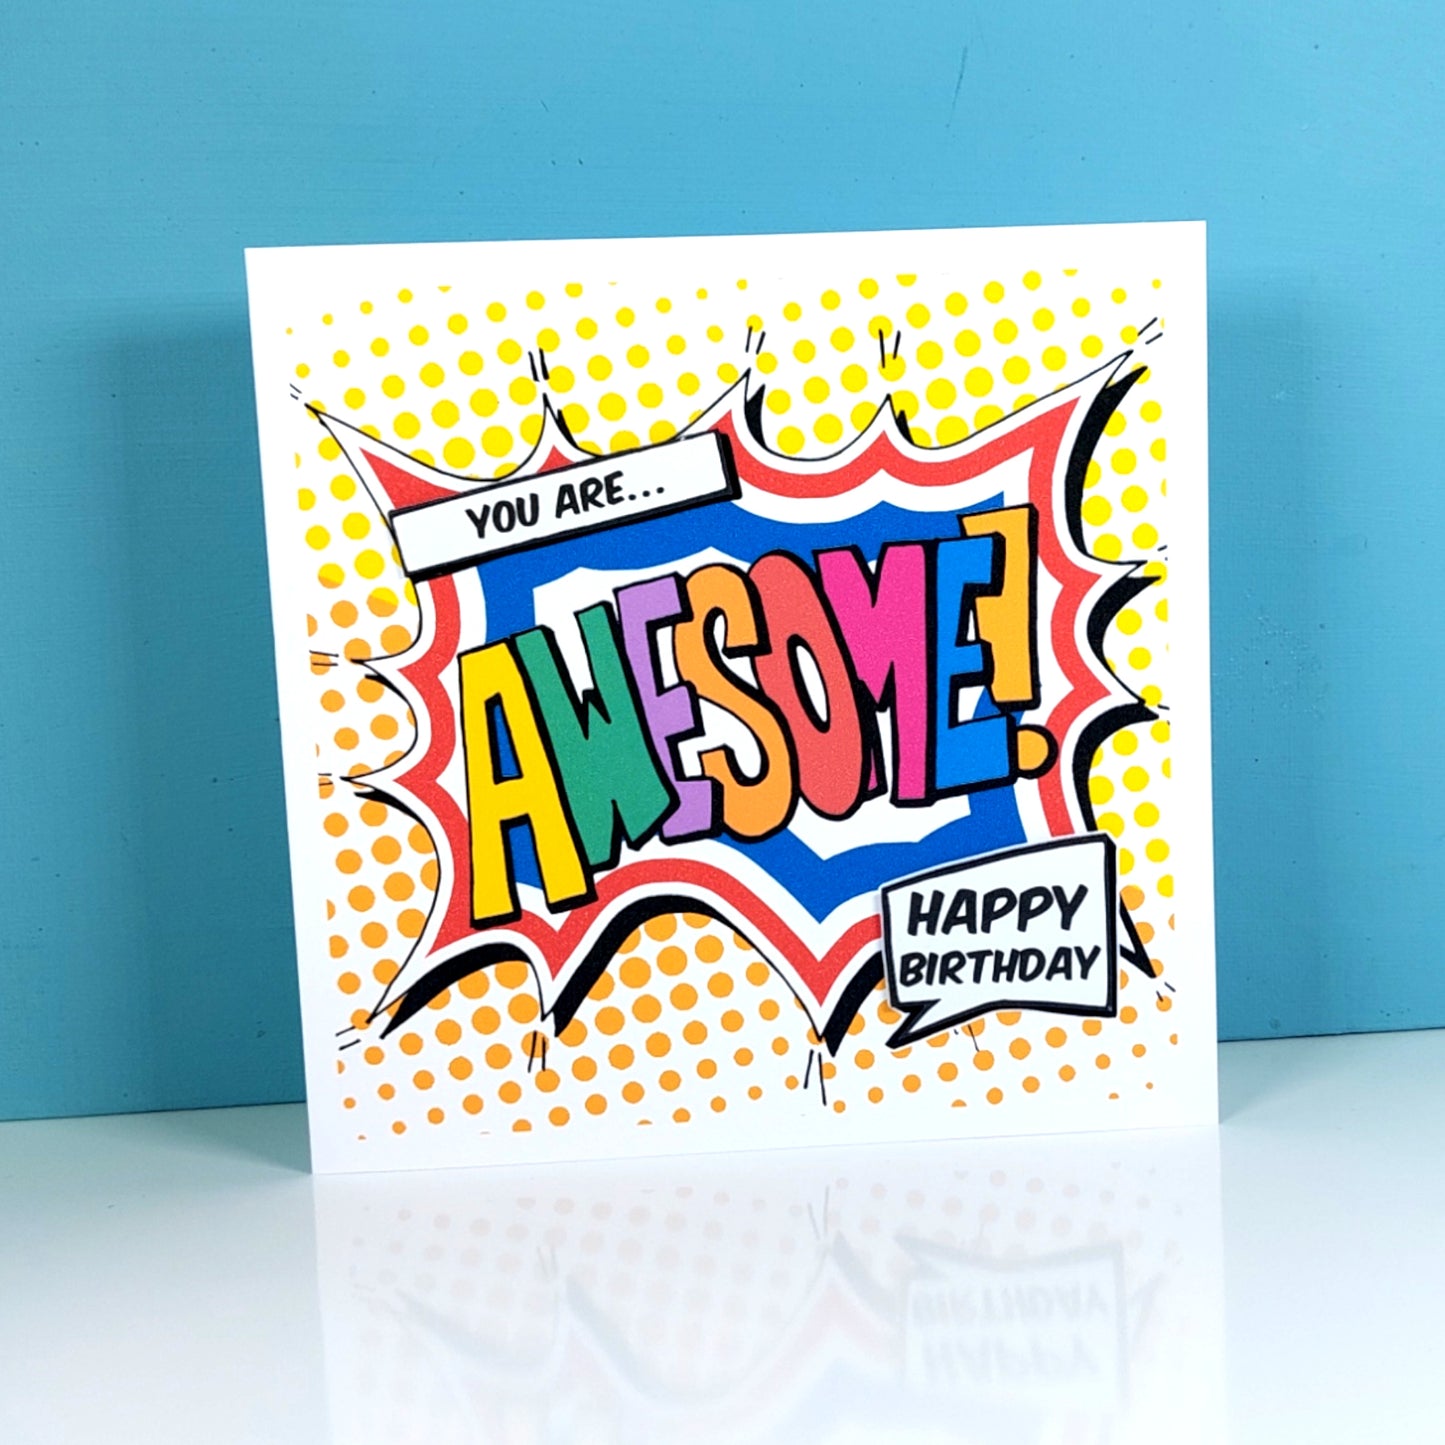 You are Awesome Birthday Card